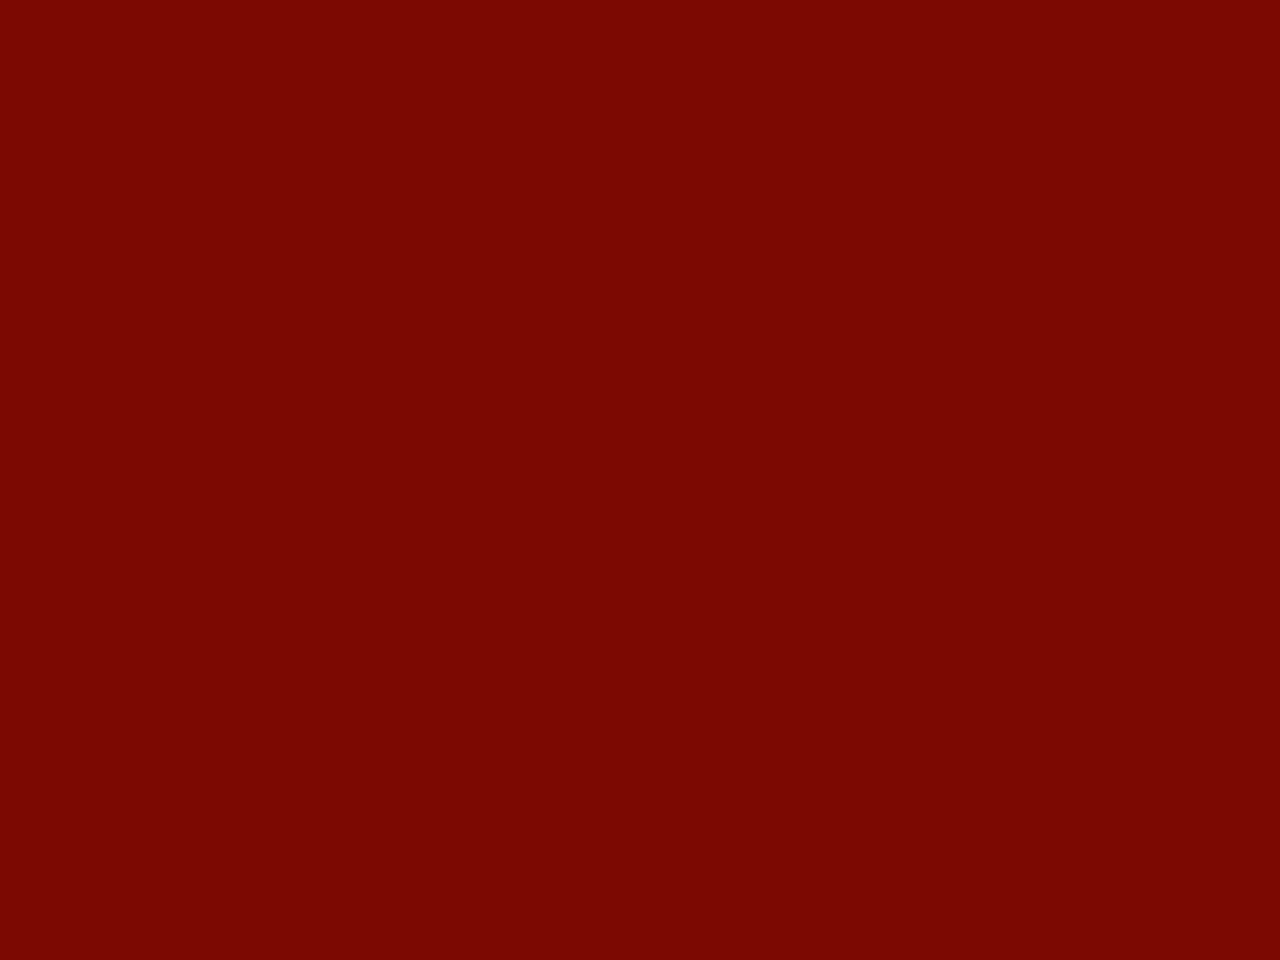 1280x960 Barn Red Solid Color Background